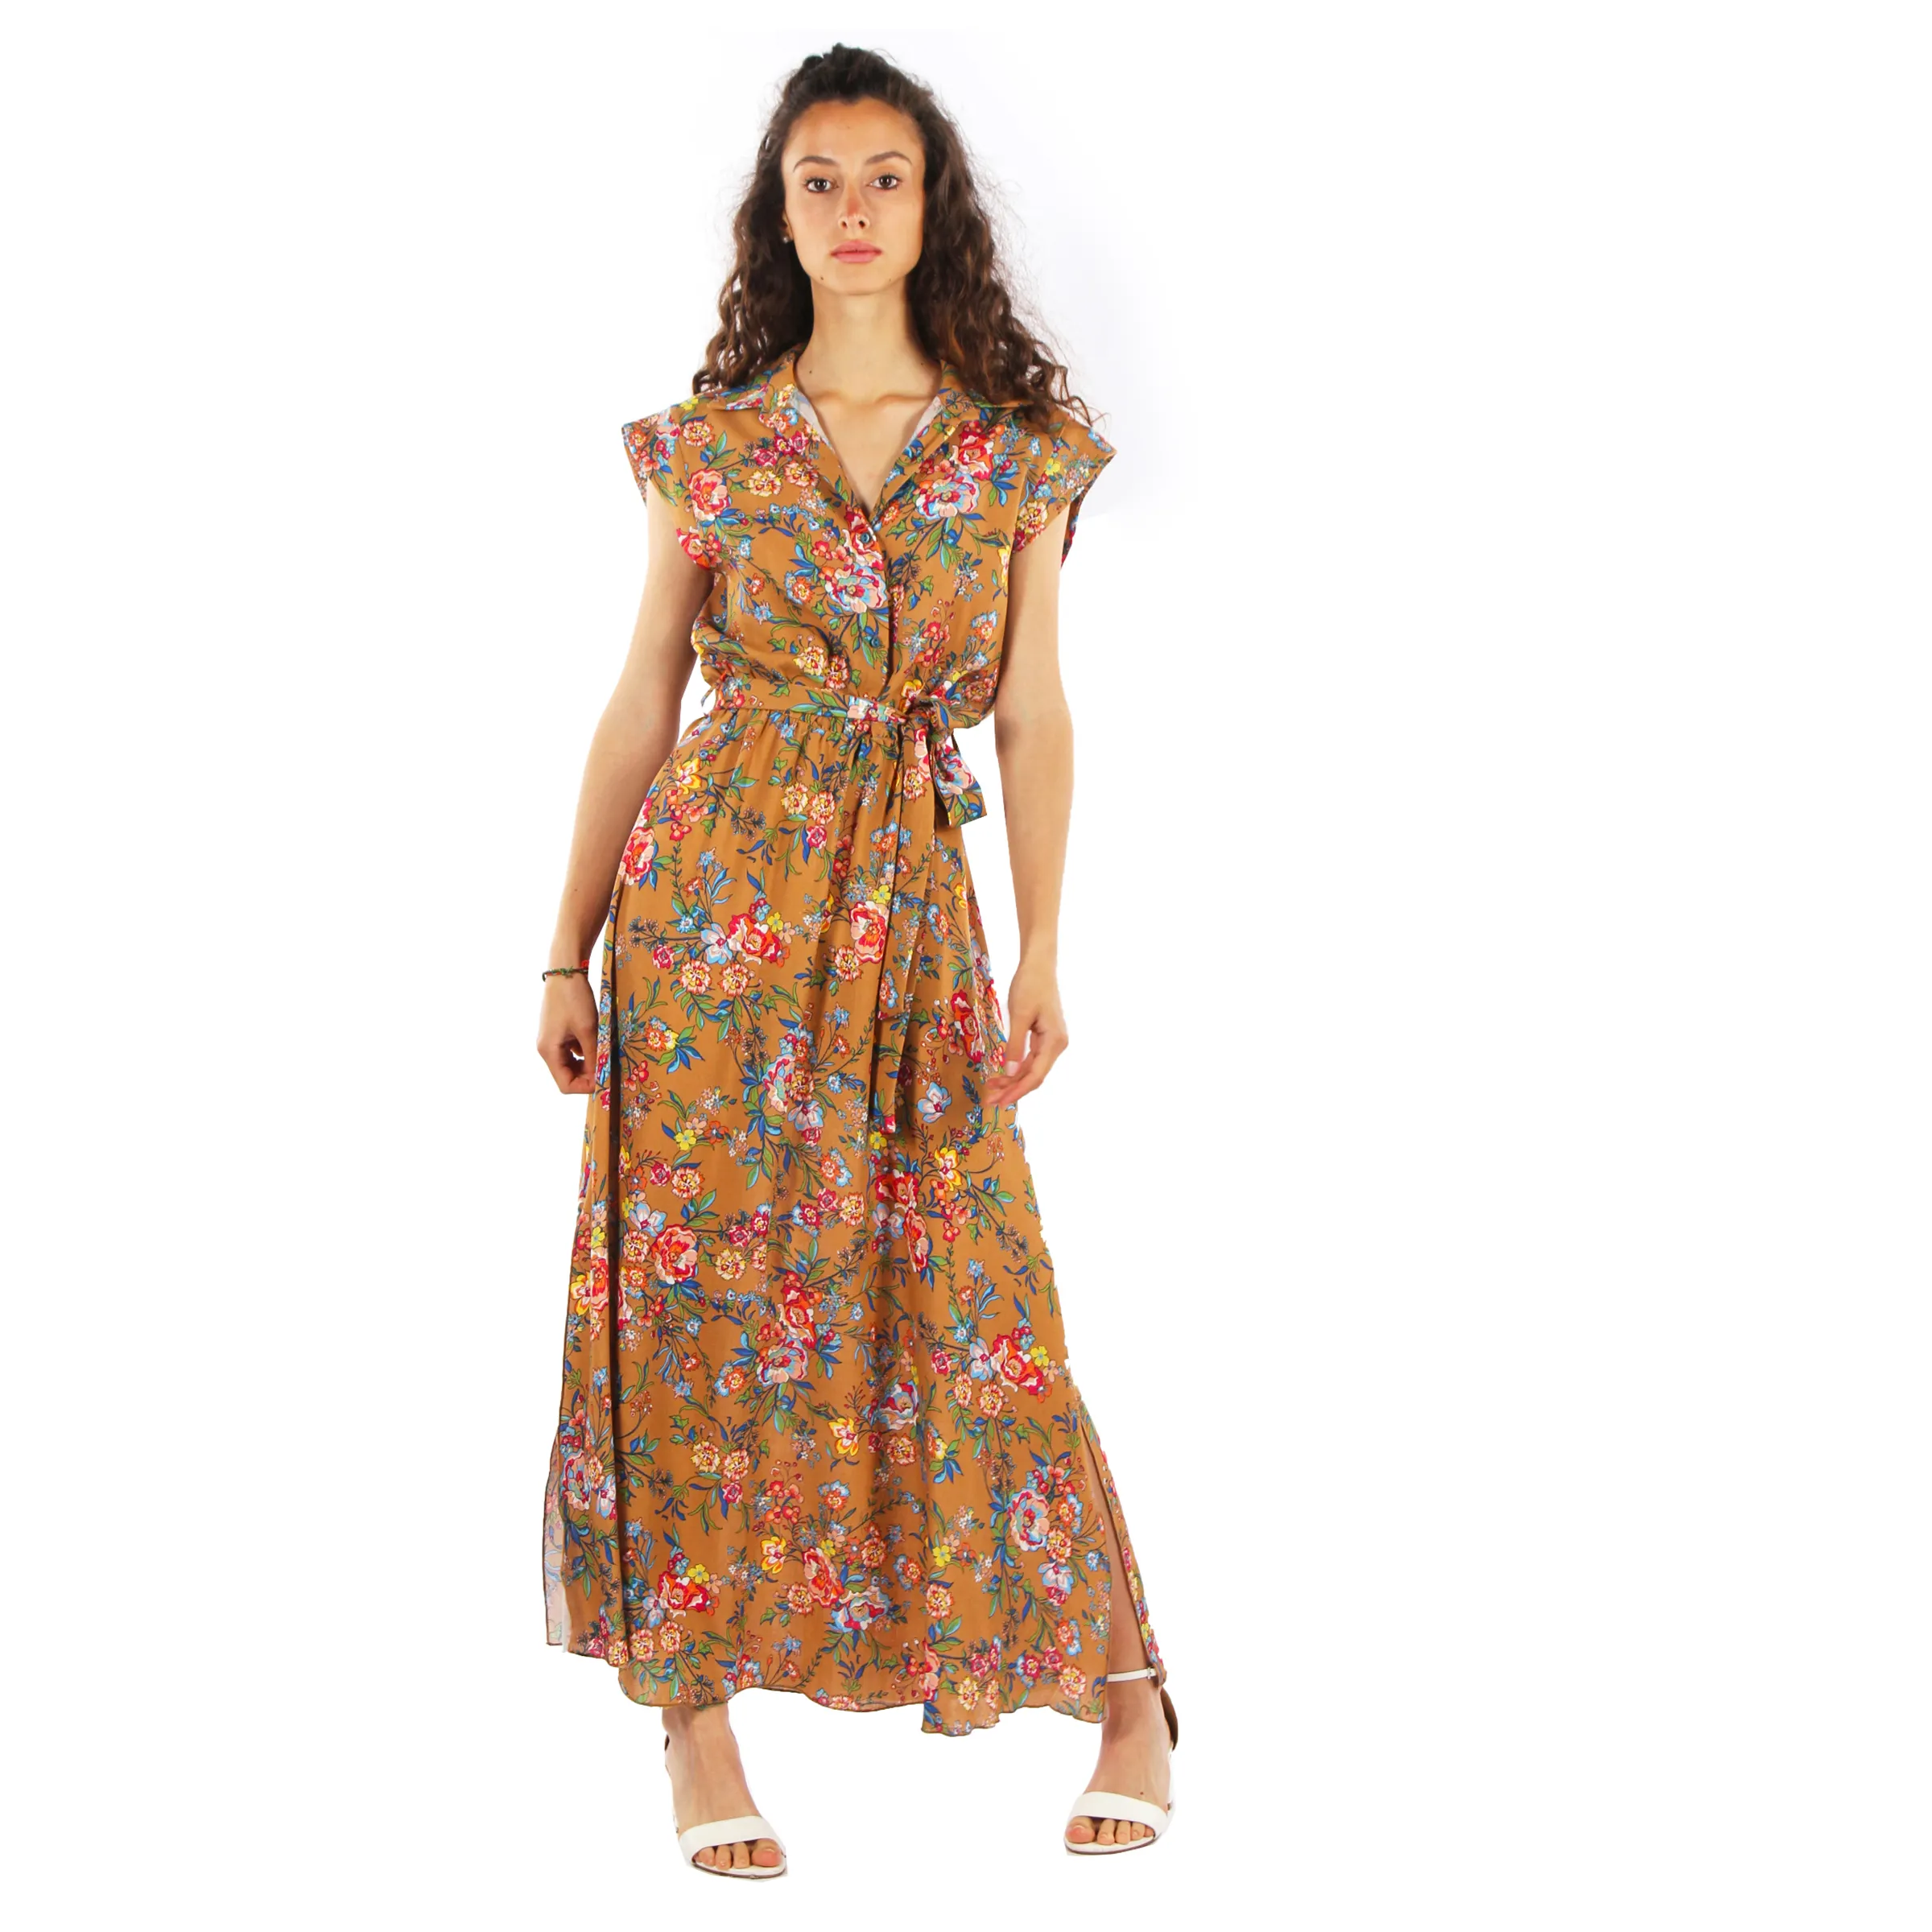 Flower Print Long Brown Floral Inspired Gown Daytime Elegance and Bohemian Flair ideal for a day party size large